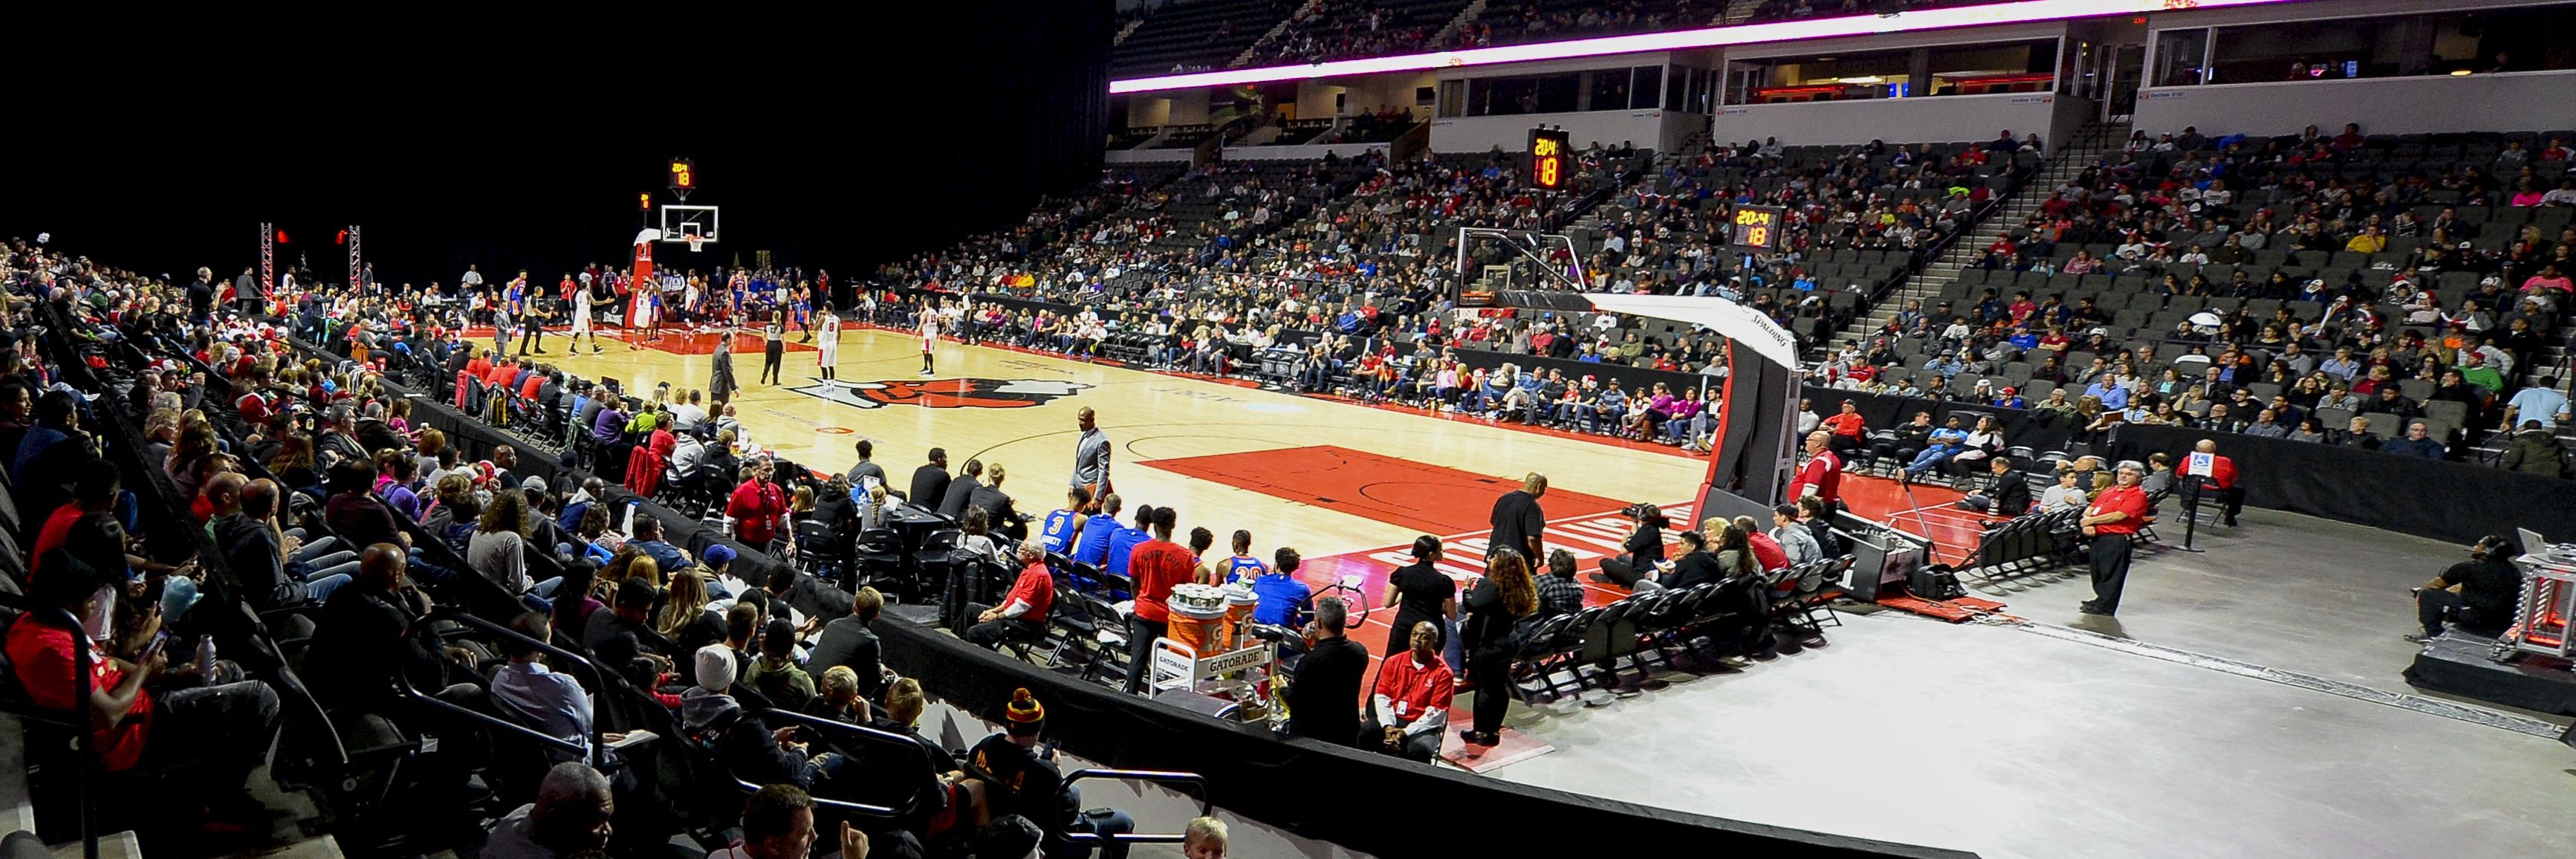 We SOLD OUT the Sears Centre Arena with - Windy City Bulls